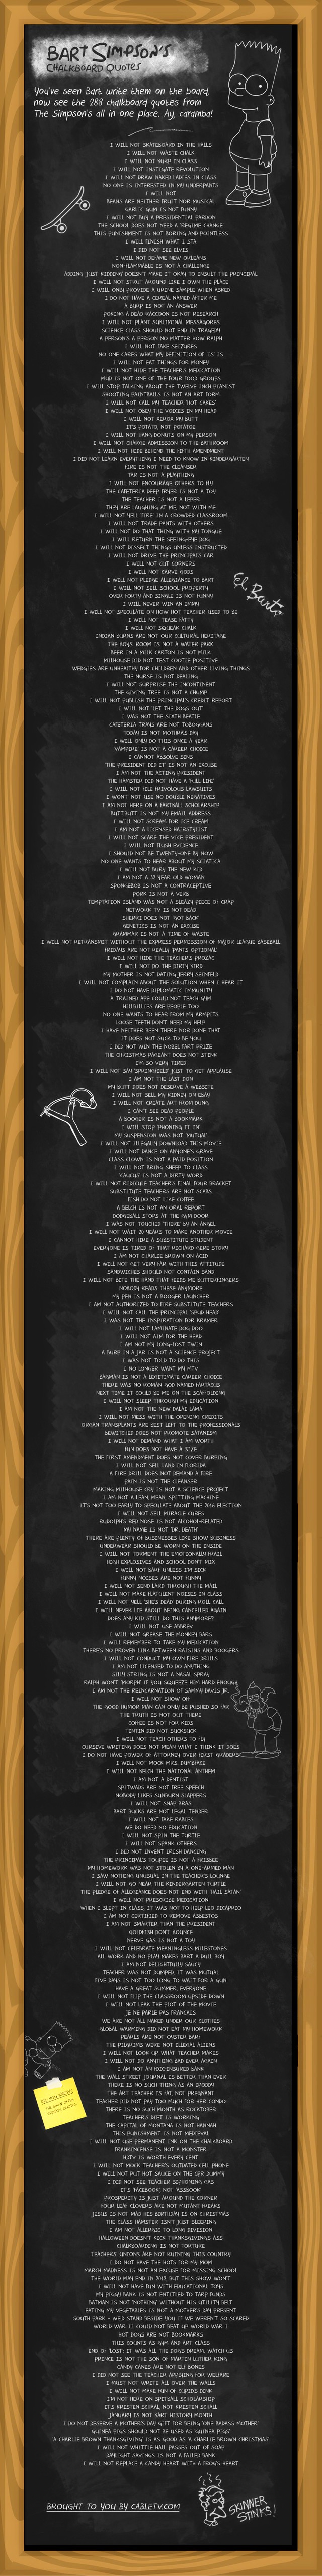 In honor of The Simpsons 500th episode, CableTV.com has compiled every chalkboard quote written by Bart. It's an epic homage.